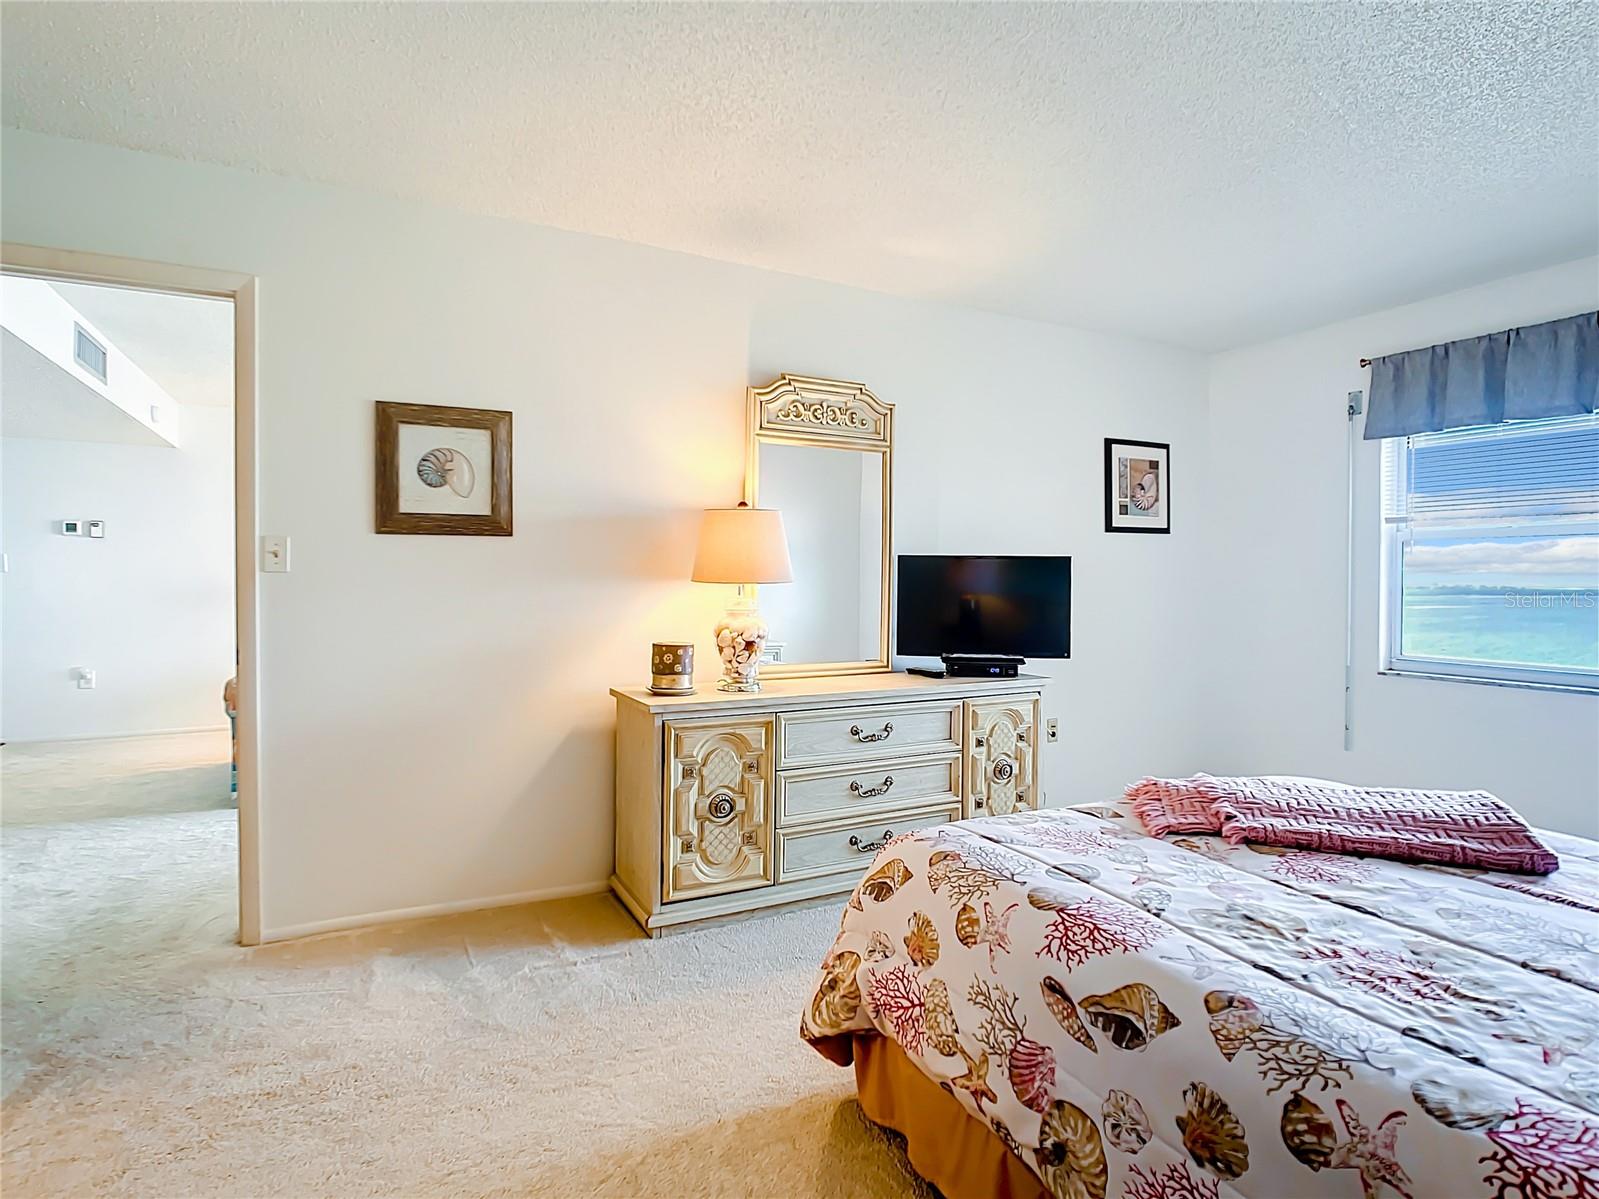 Primary bedroom, spacious for your king-sized bed and dressers